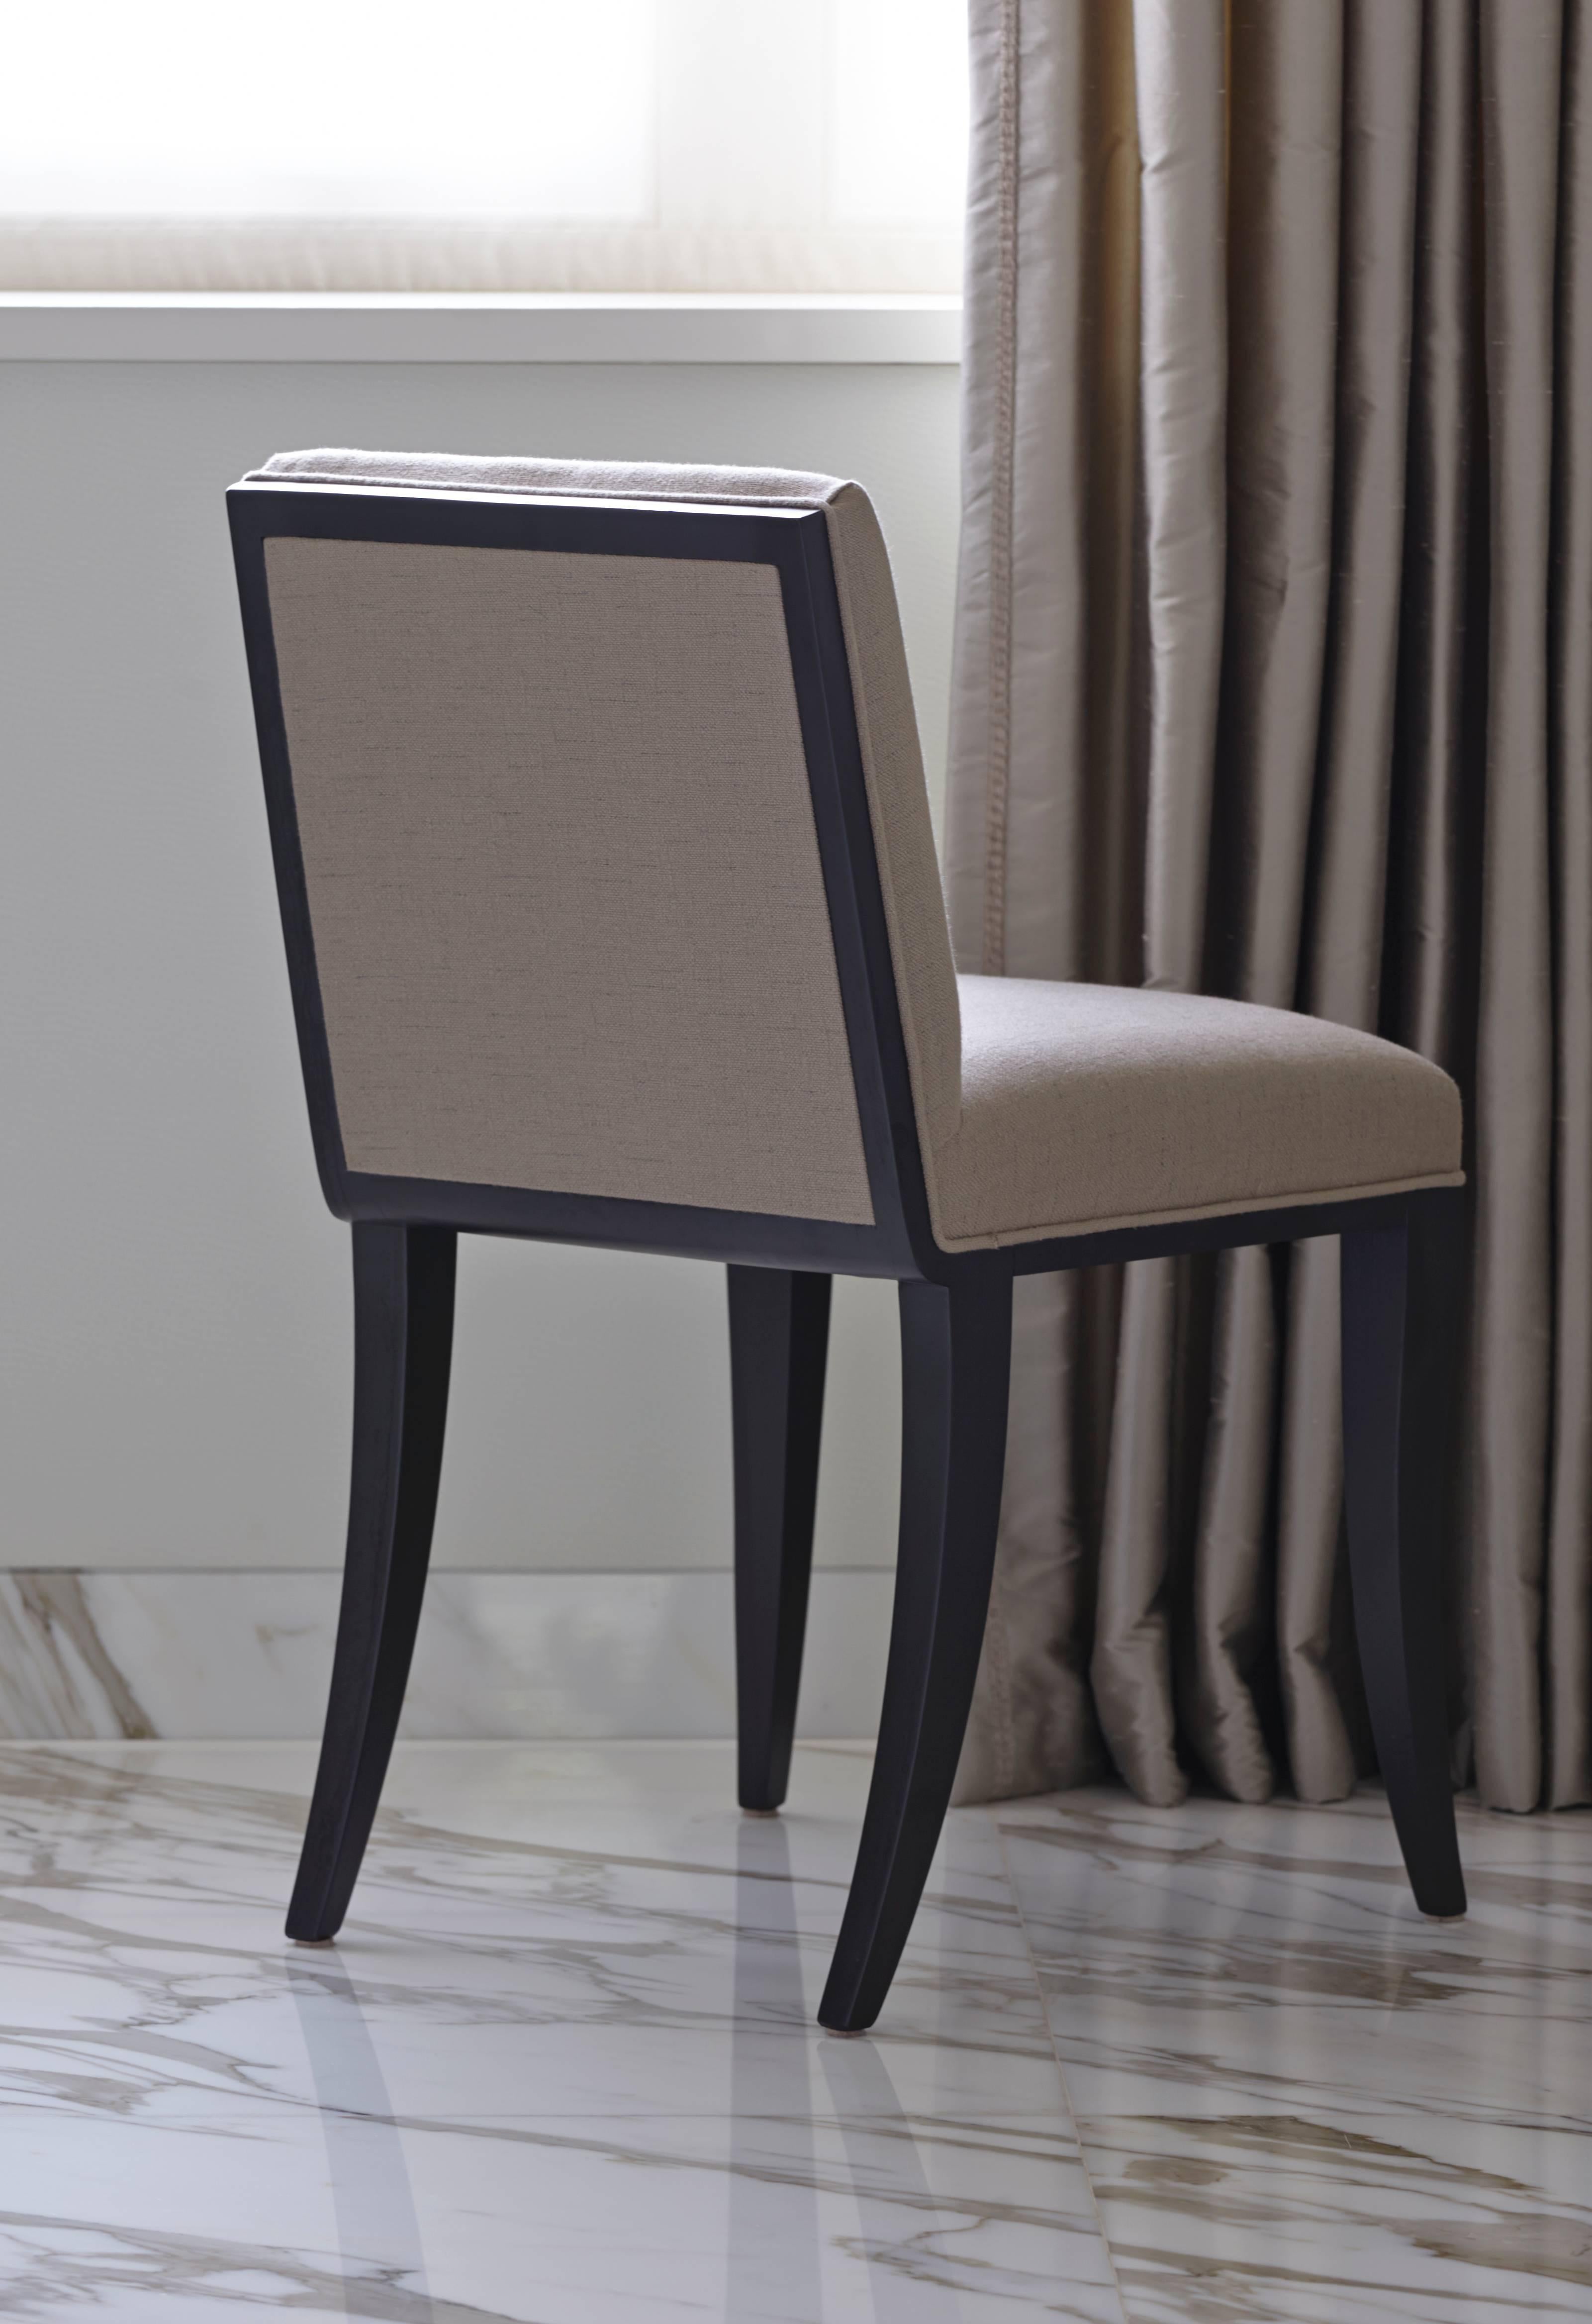 Hand-Crafted Gosling Sybil Low Backed Dining Chair with black lacquer legs. For Sale